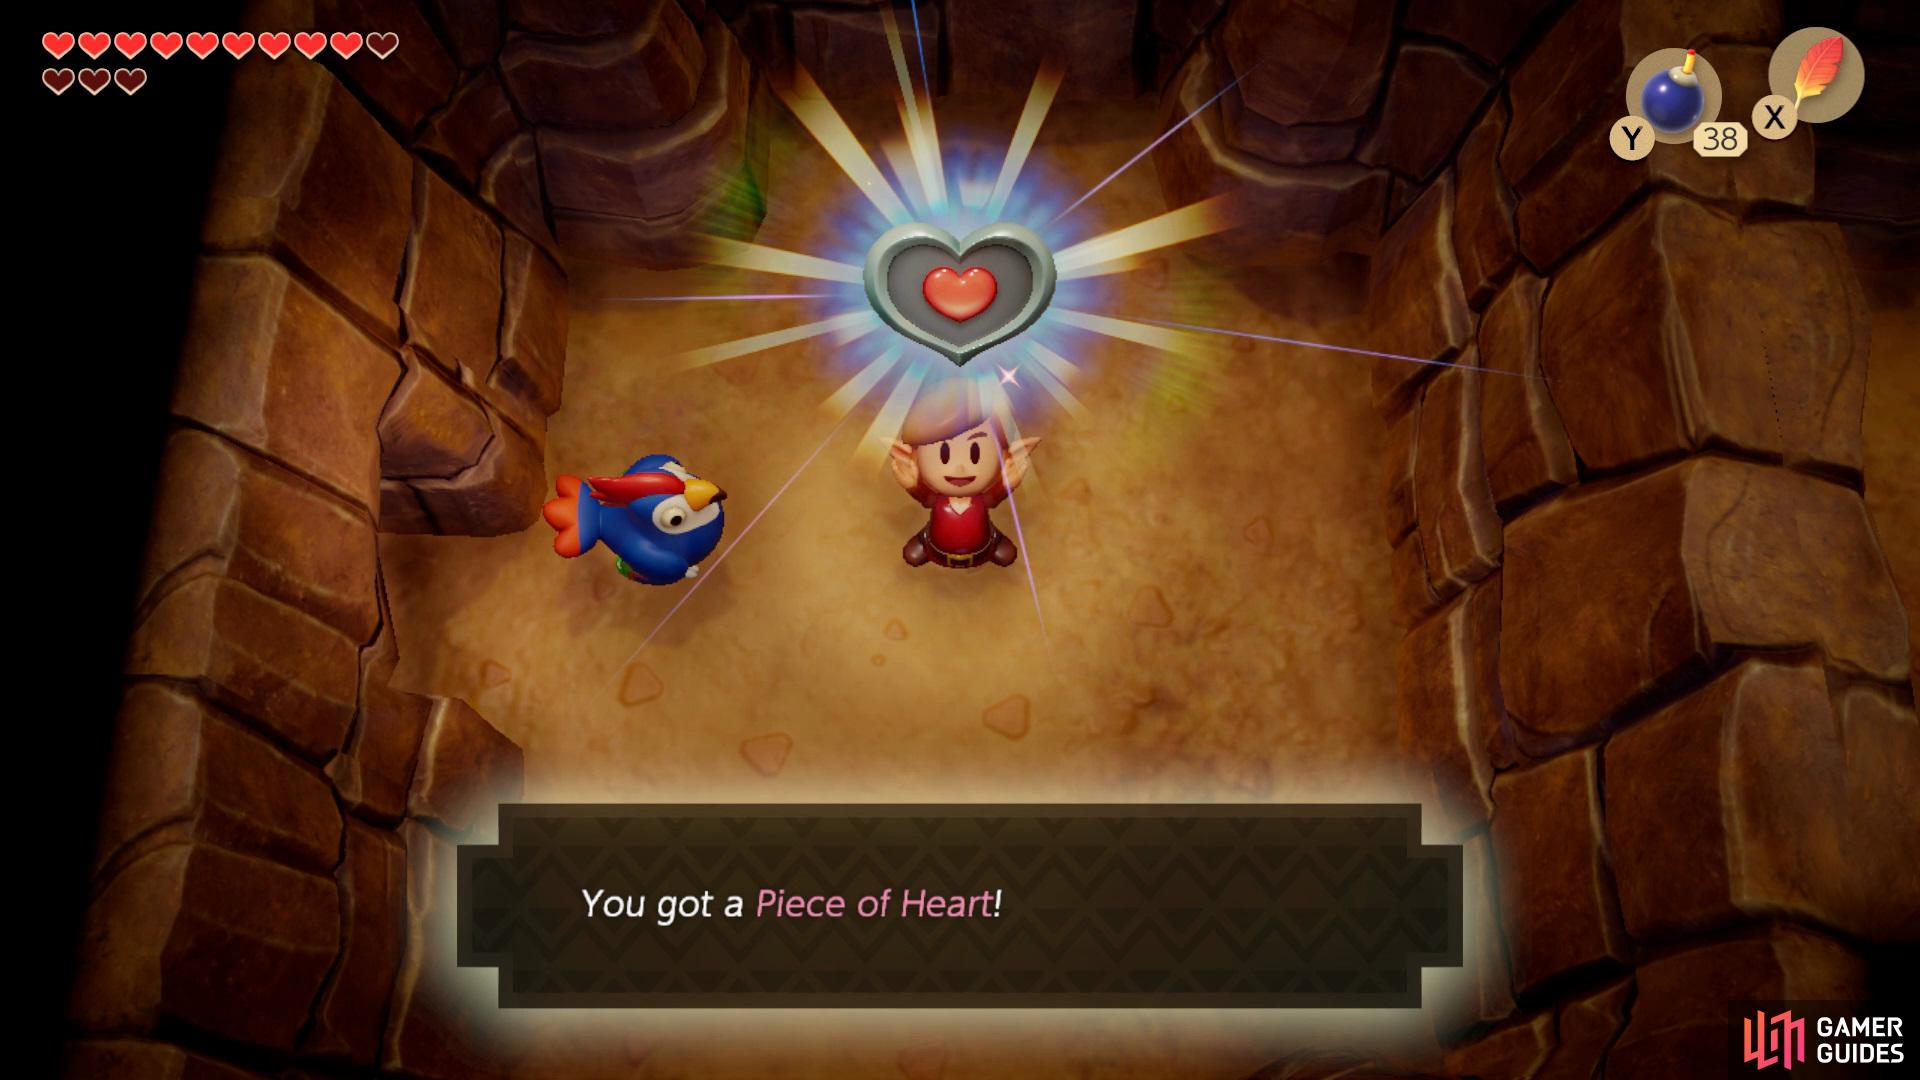 Take out the enemies in the cave and head down then right to find a Piece of Heart in the center,